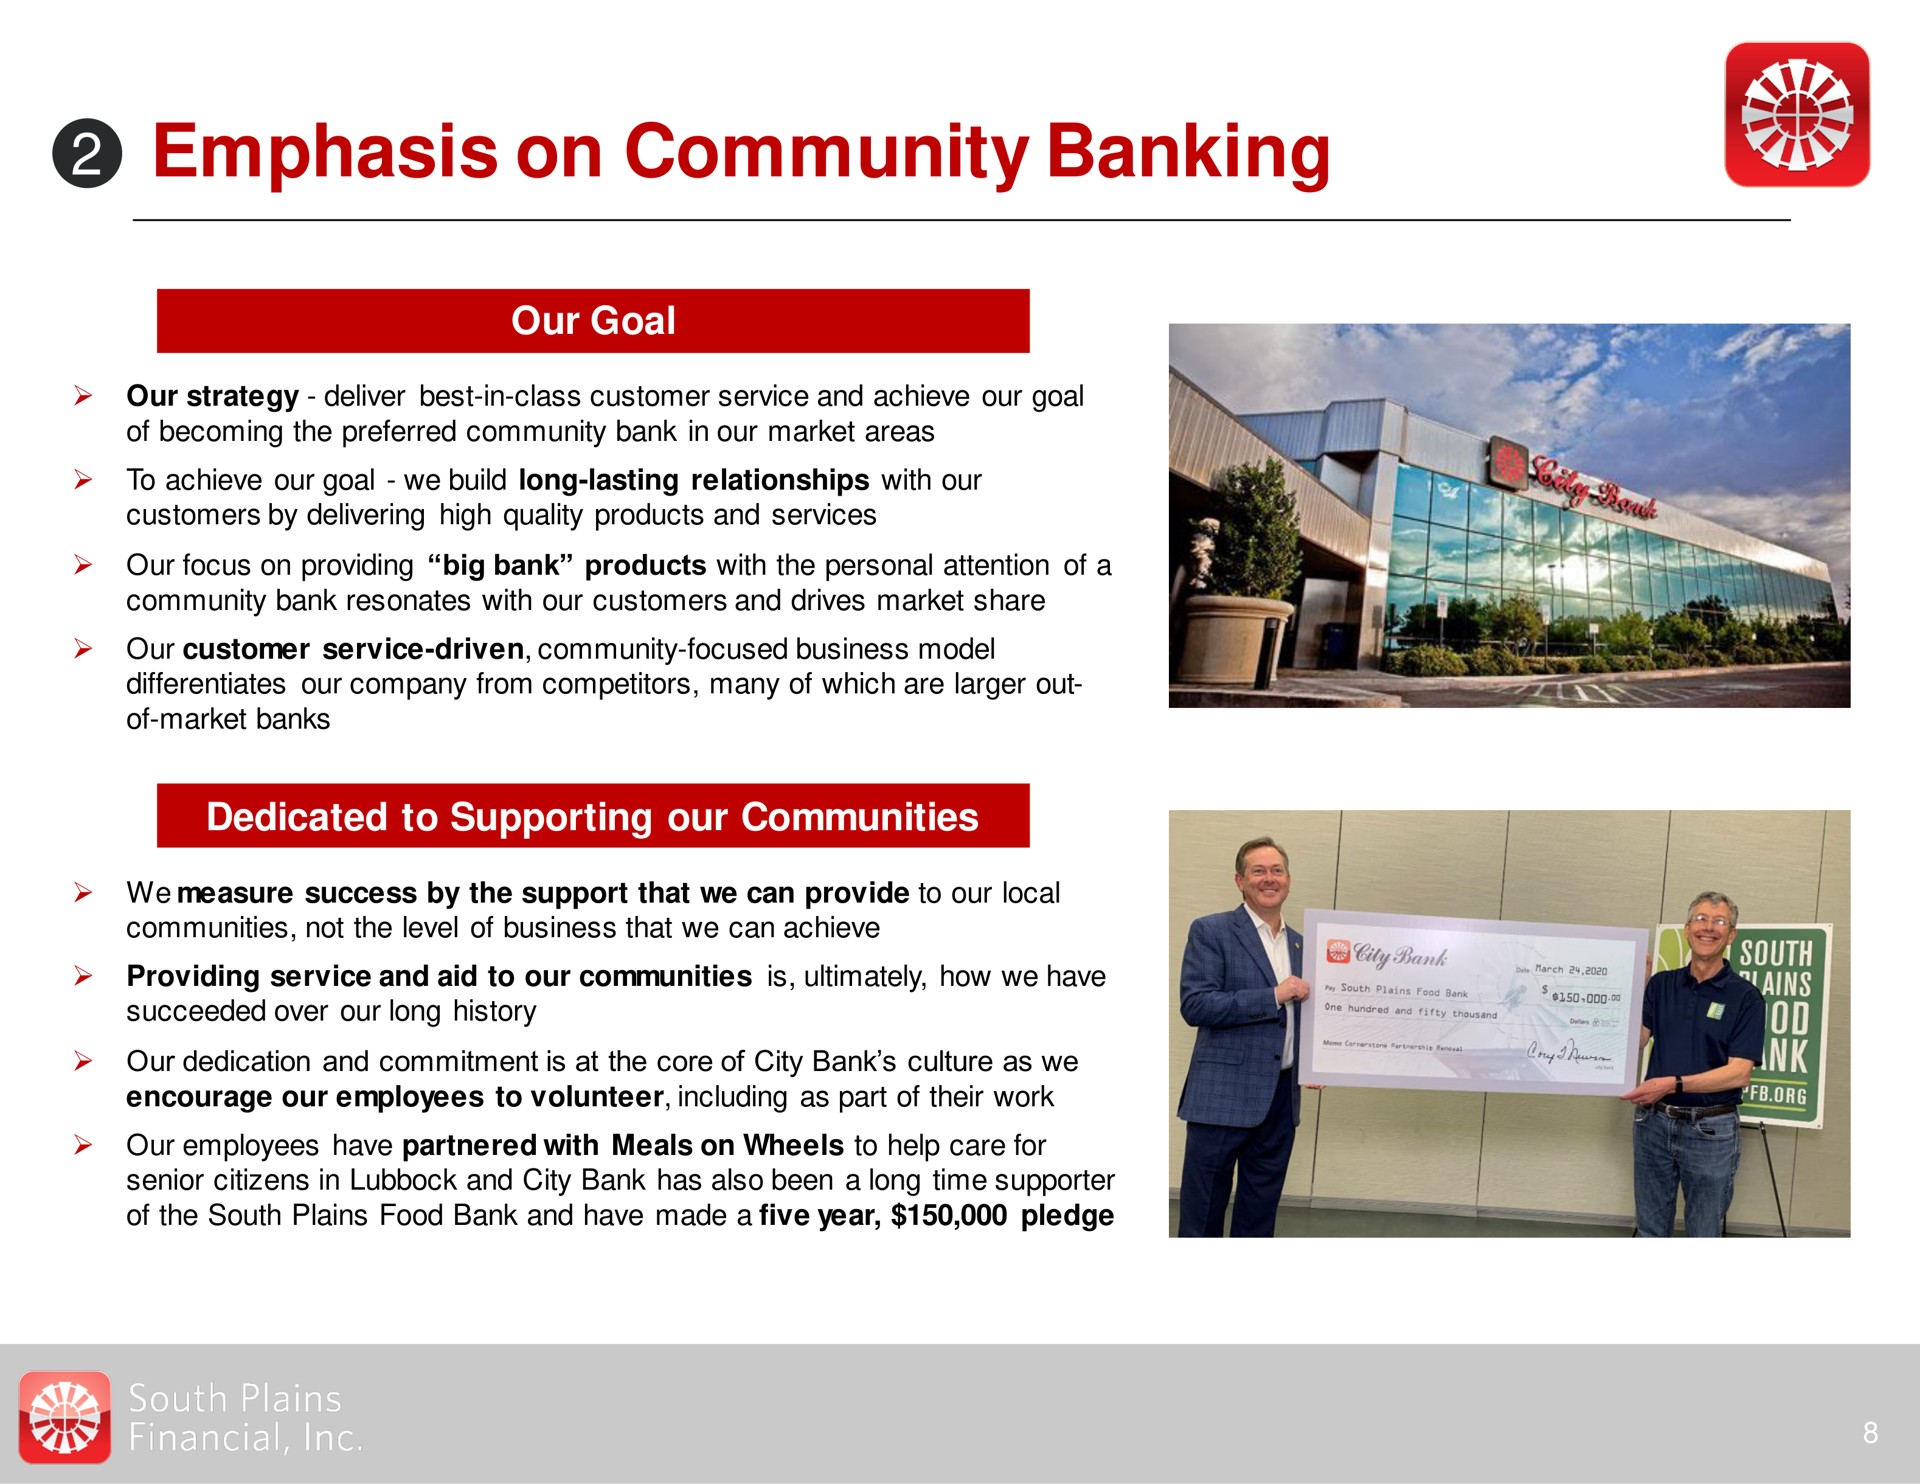 emphasis on community banking | South Plains Financial